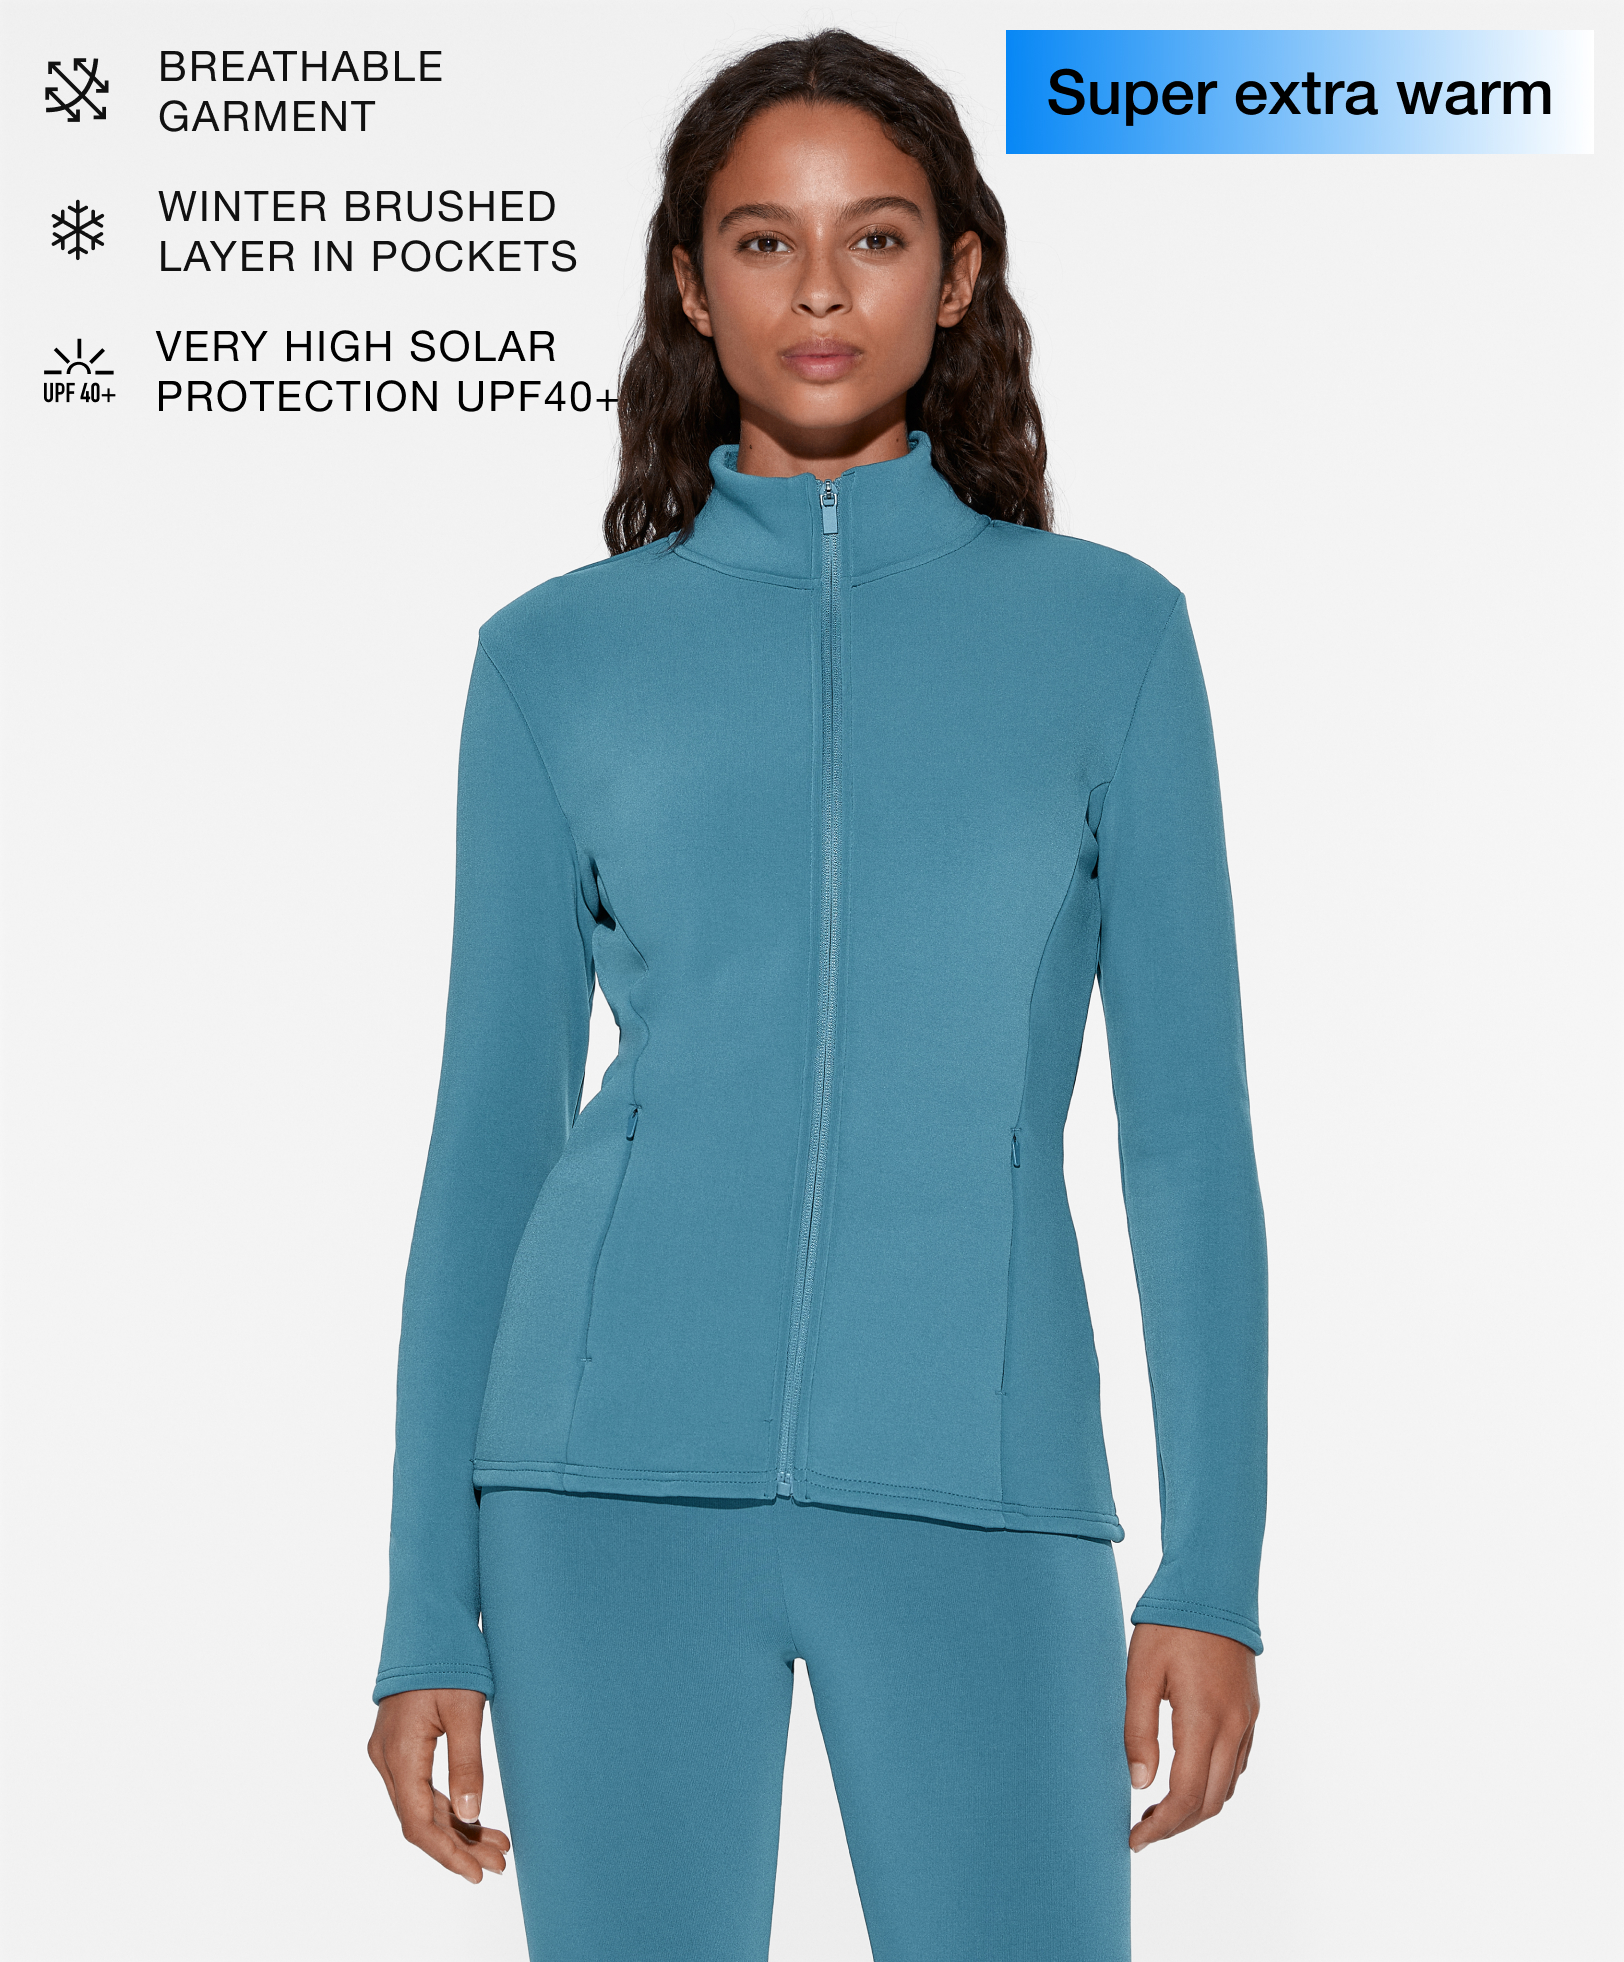 Seamless Funktions-Jacke in super extra warm Qualität